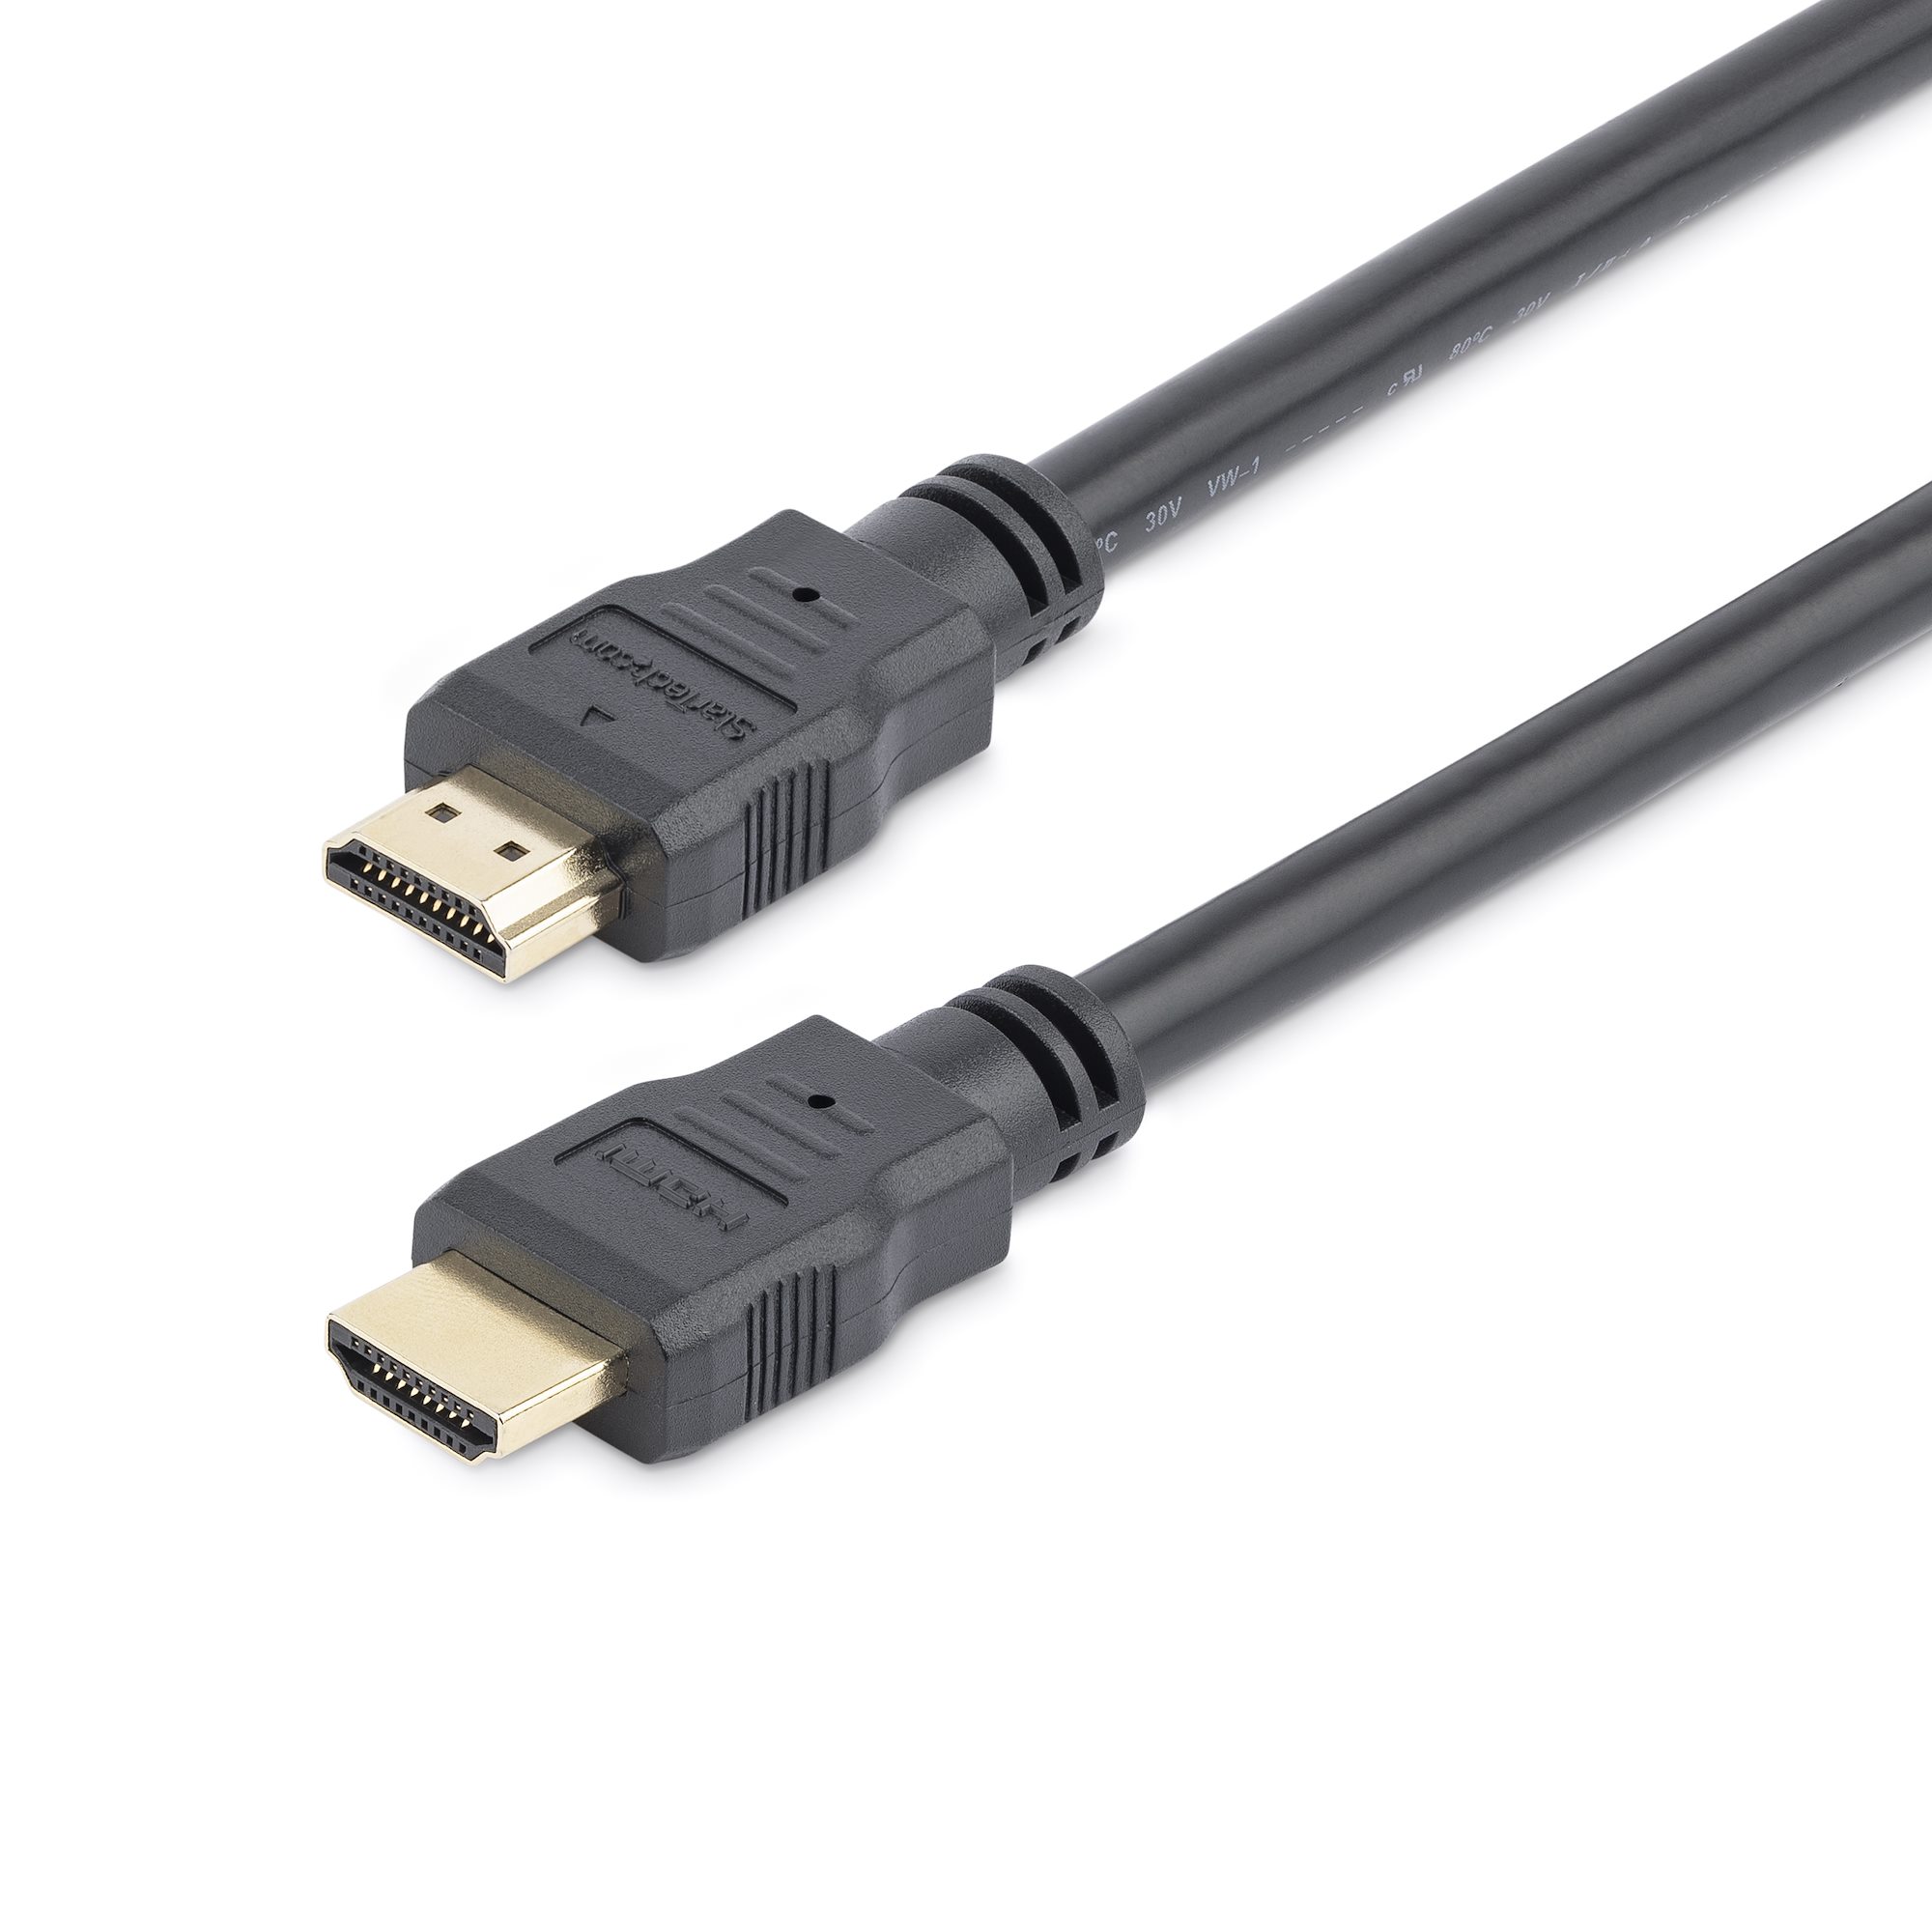 【HDMM1】1 FT HIGH SPEED HDMI CABLE - ULT